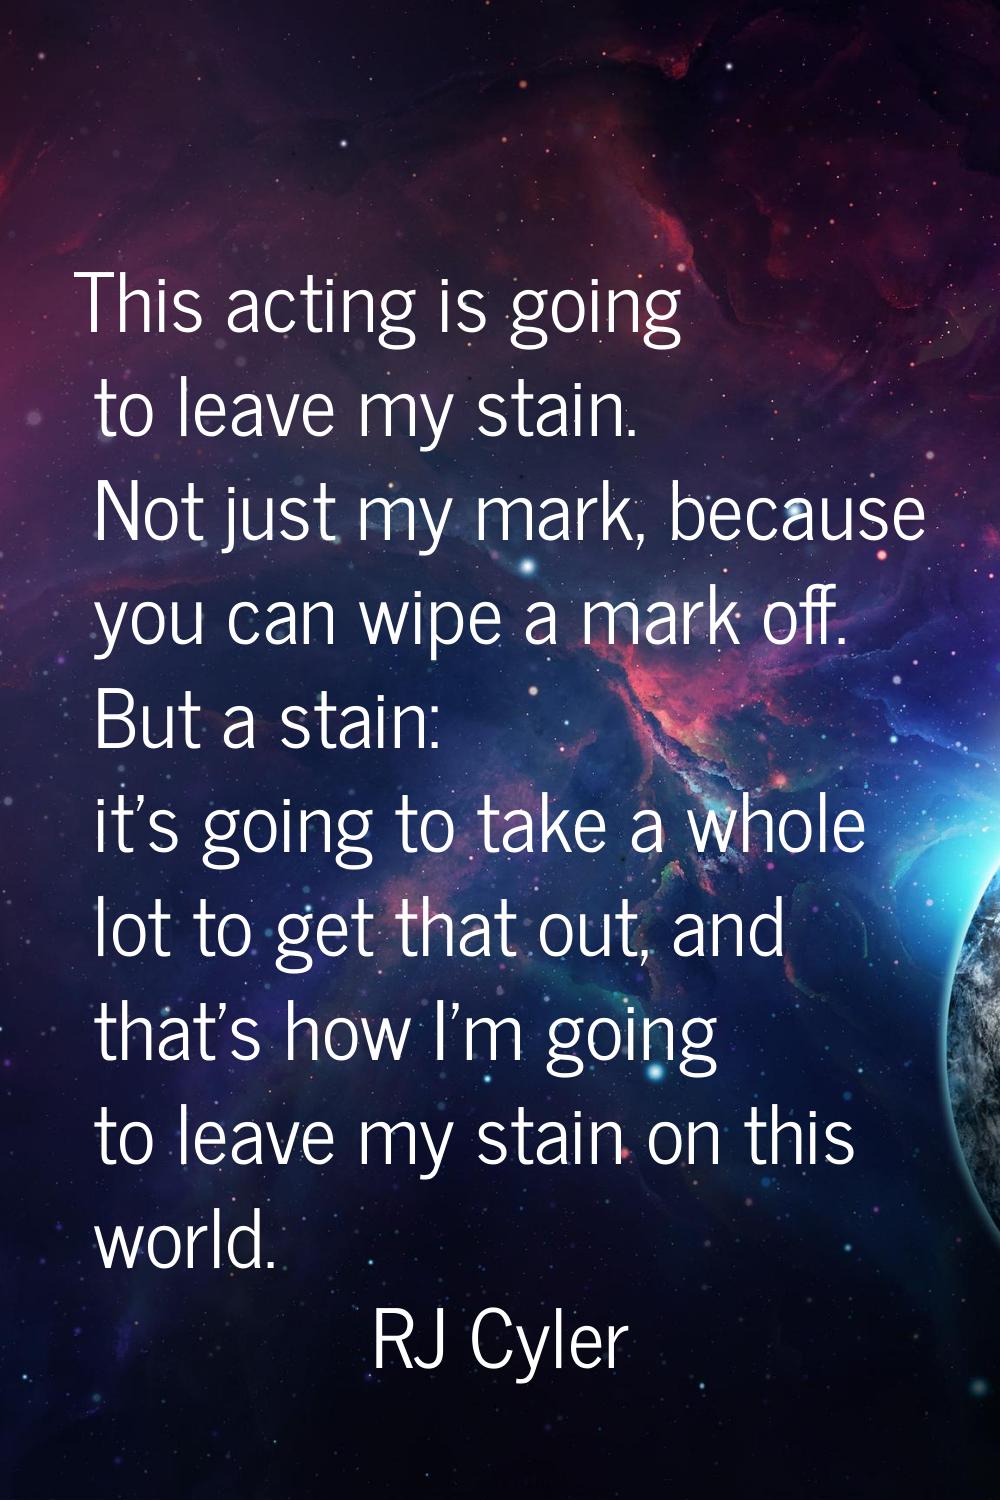 This acting is going to leave my stain. Not just my mark, because you can wipe a mark off. But a st